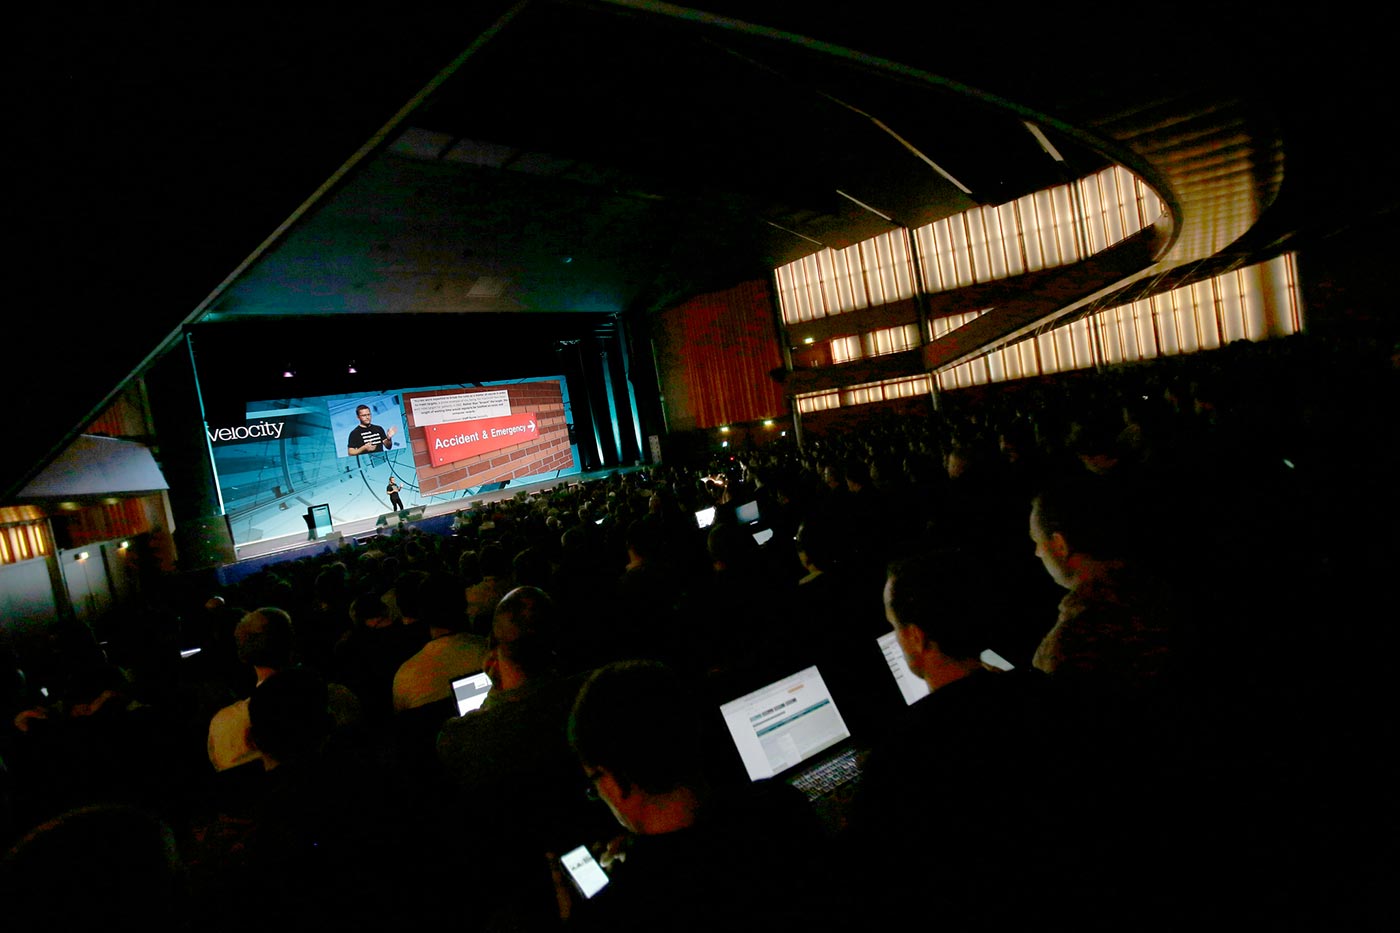 Keynote stage at the O'Reilly Velocity Conference in Amsterdam